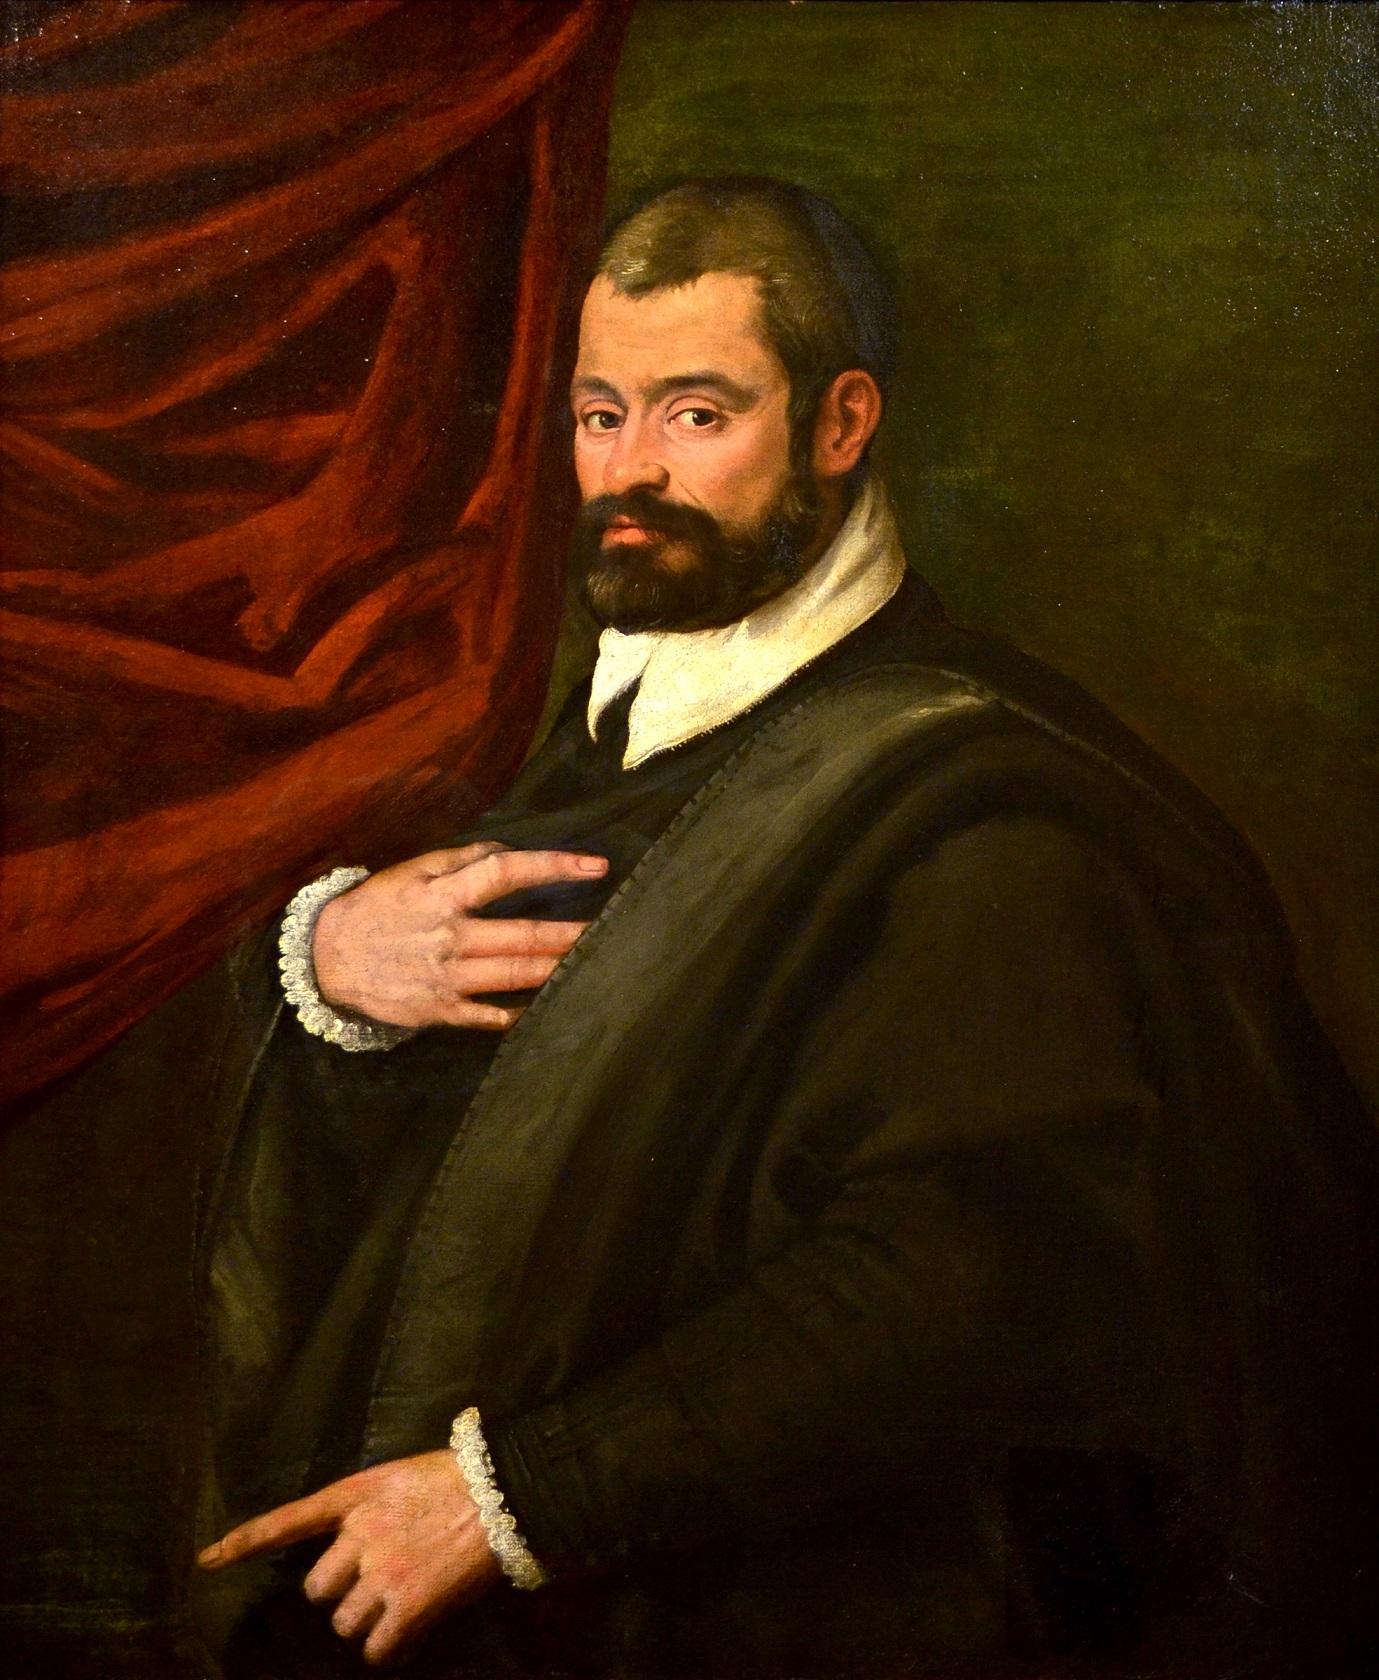 Paint Oil on canvas Portrait Venetian Tintoretto 16th Century Old master Italy  - Painting by Leandro da Ponte known as Leandro Bassano (Bassano, 1557 - Venice, 1622), attributed to